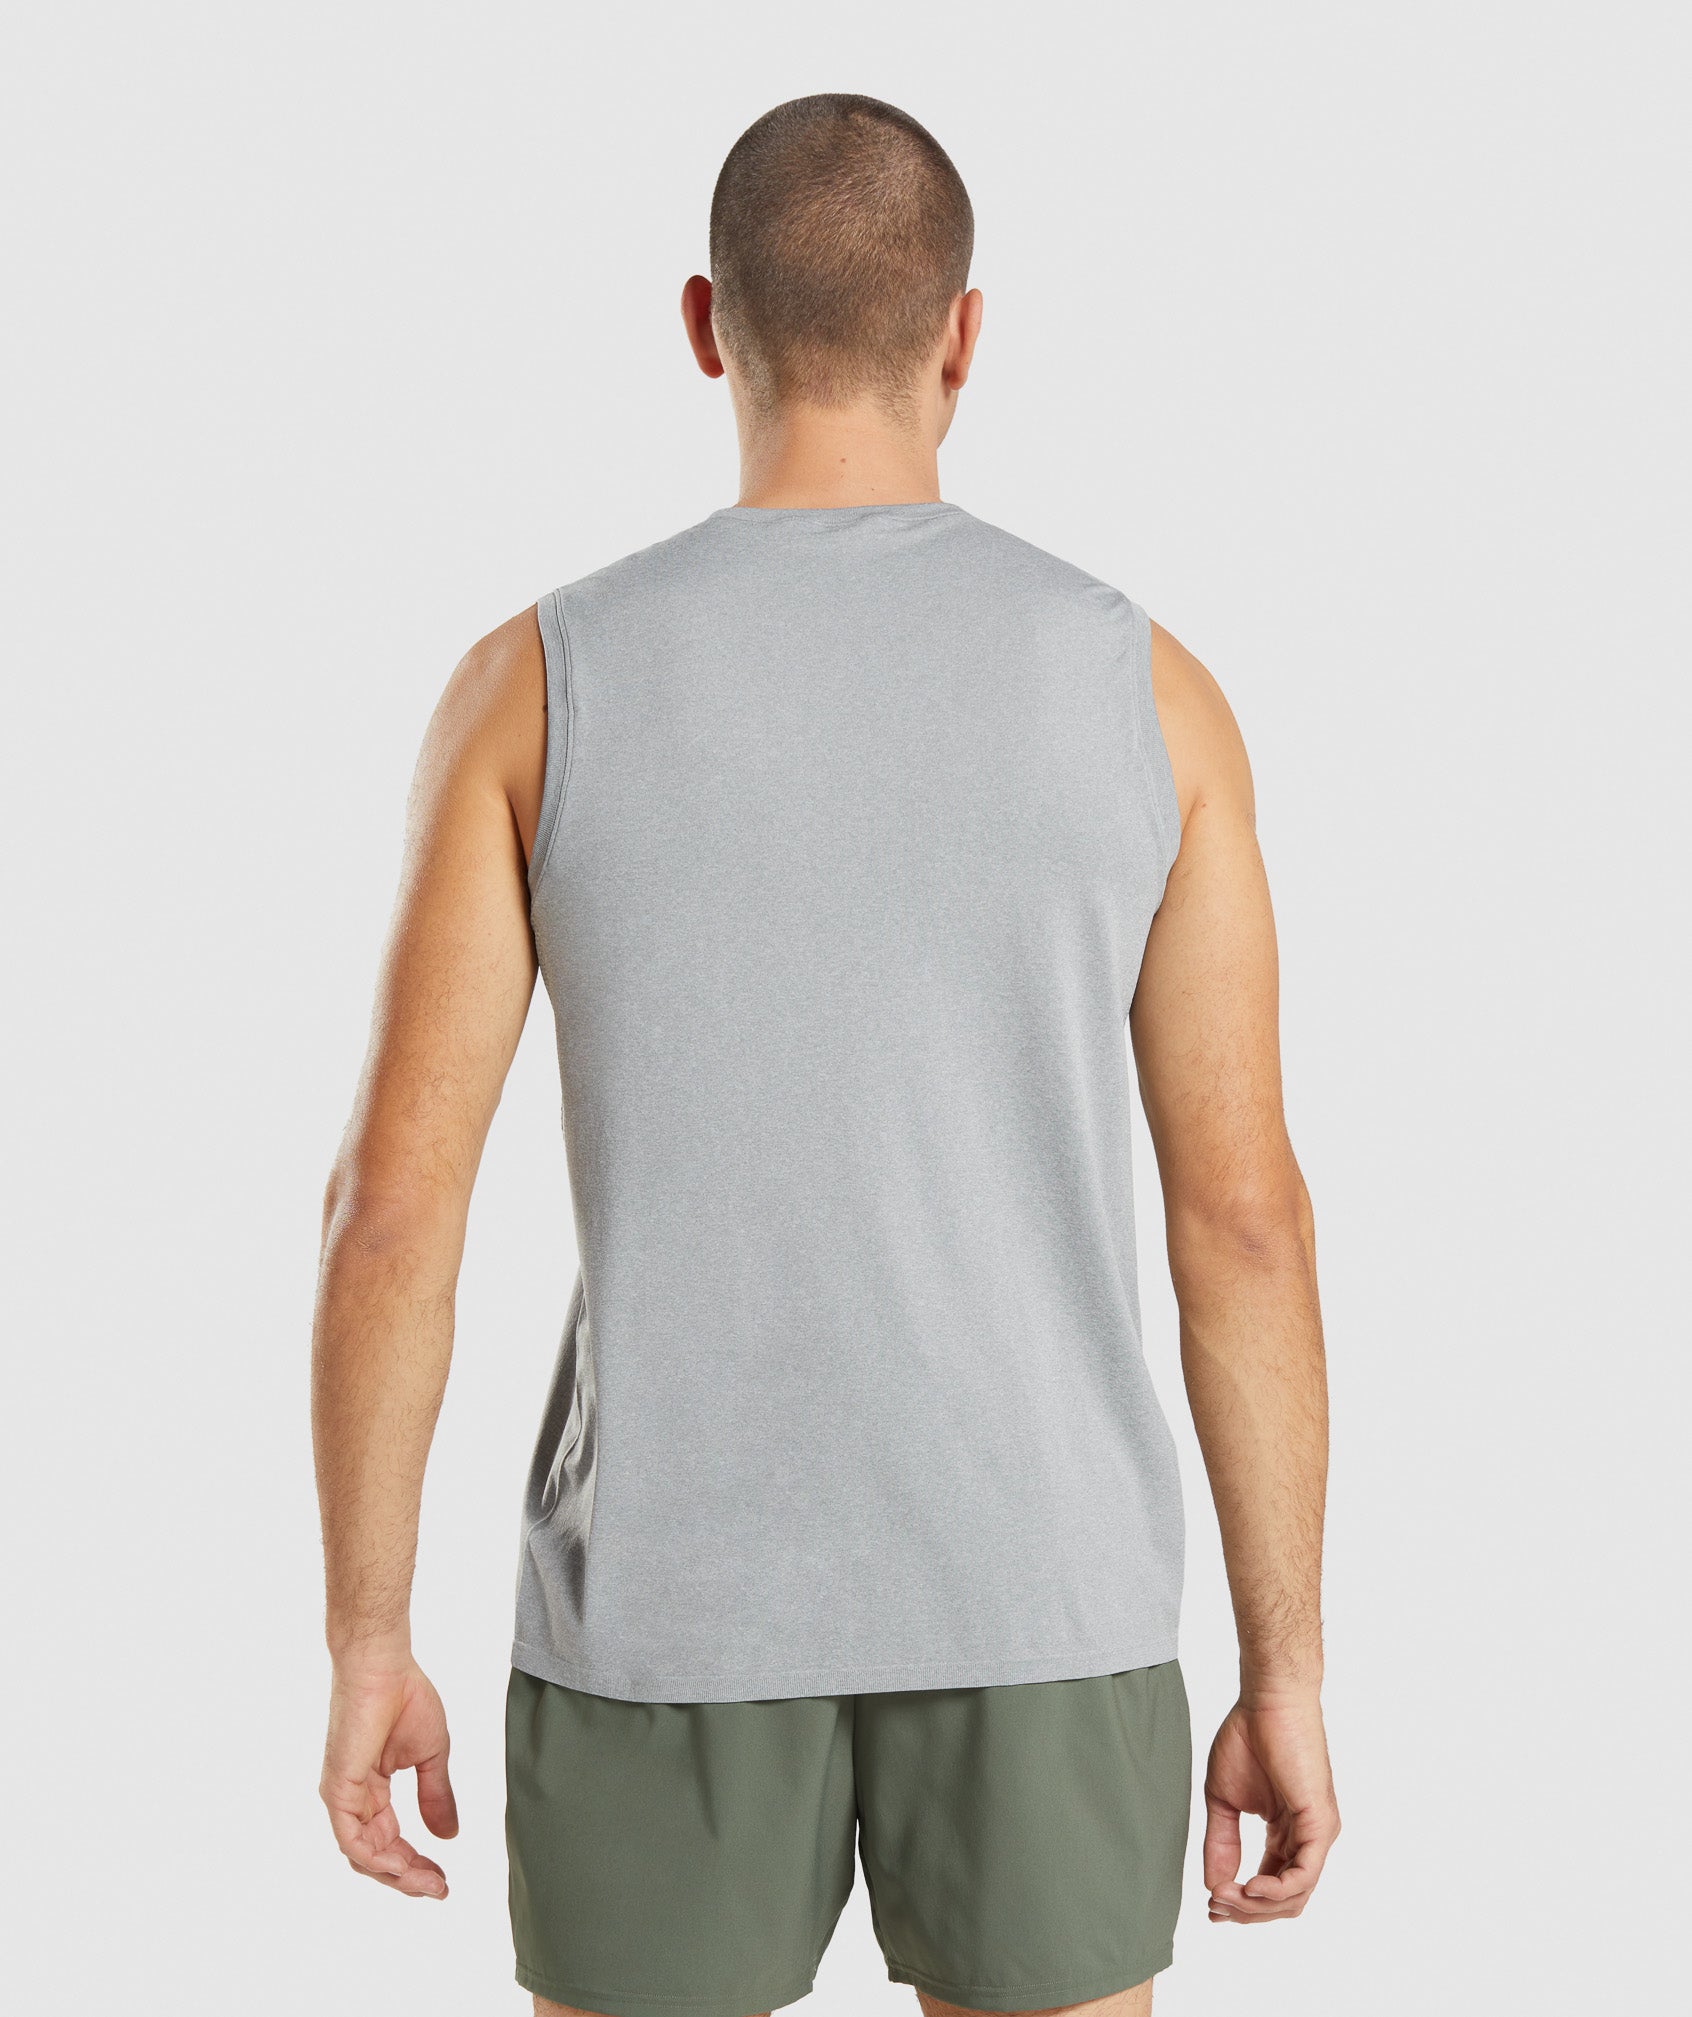 Arrival Seamless Tank in Grey - view 2